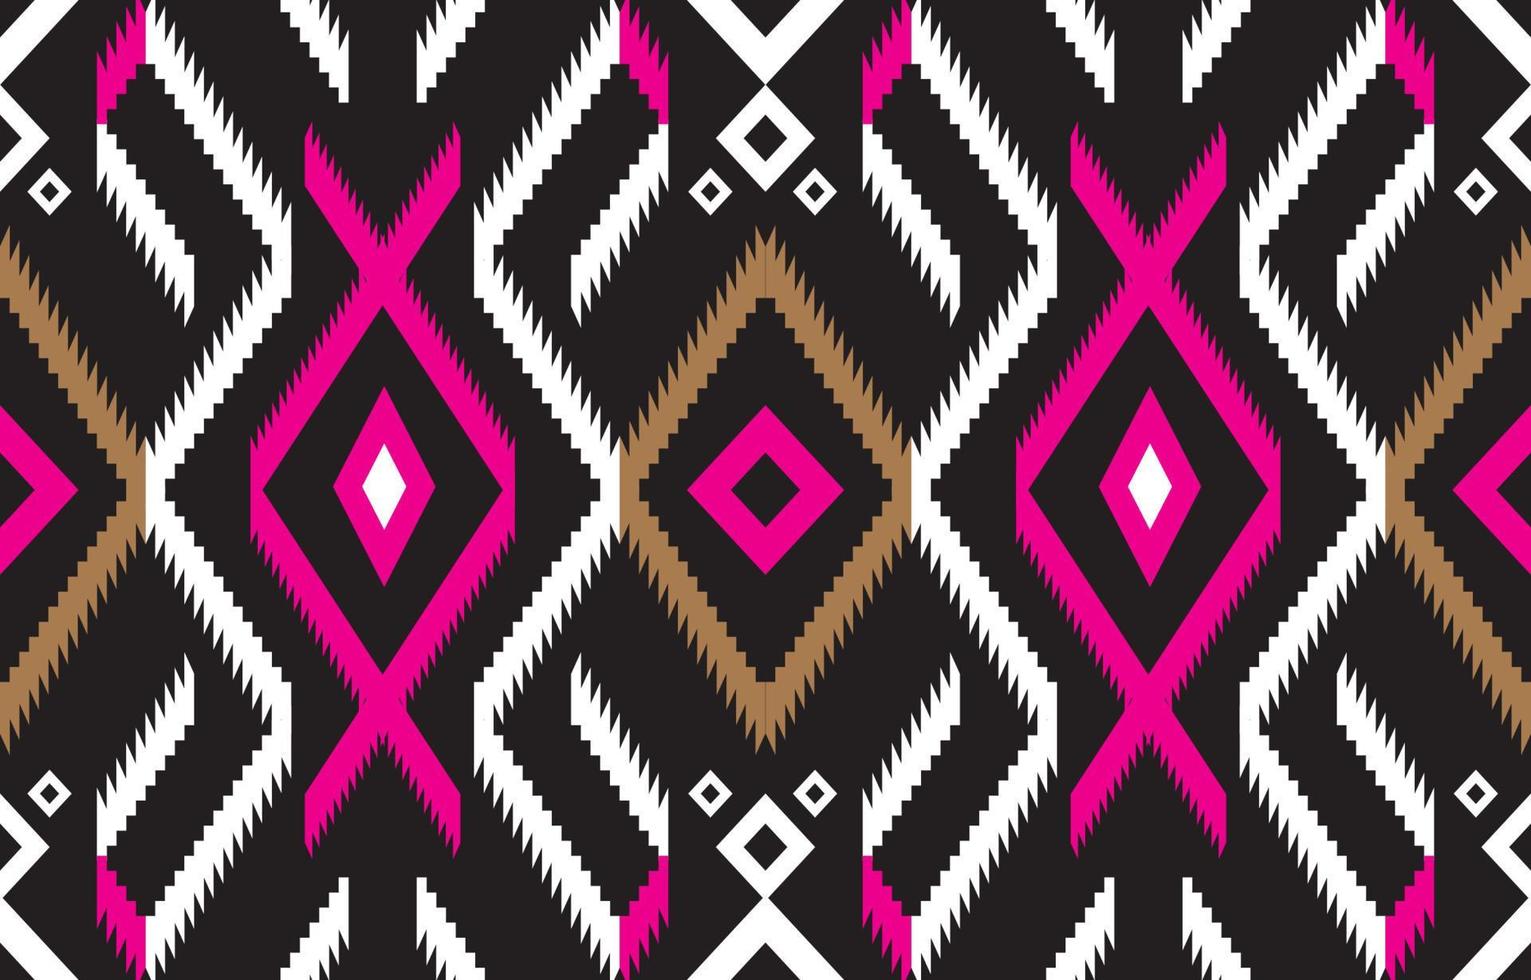 Beautiful ikat ethnic pattern. Seamless pattern in tribal, folk embroidery, and Mexican style. Aztec geometric art ornament print. Design for carpet, wallpaper, clothing, wrapping, fabric, cover. vector